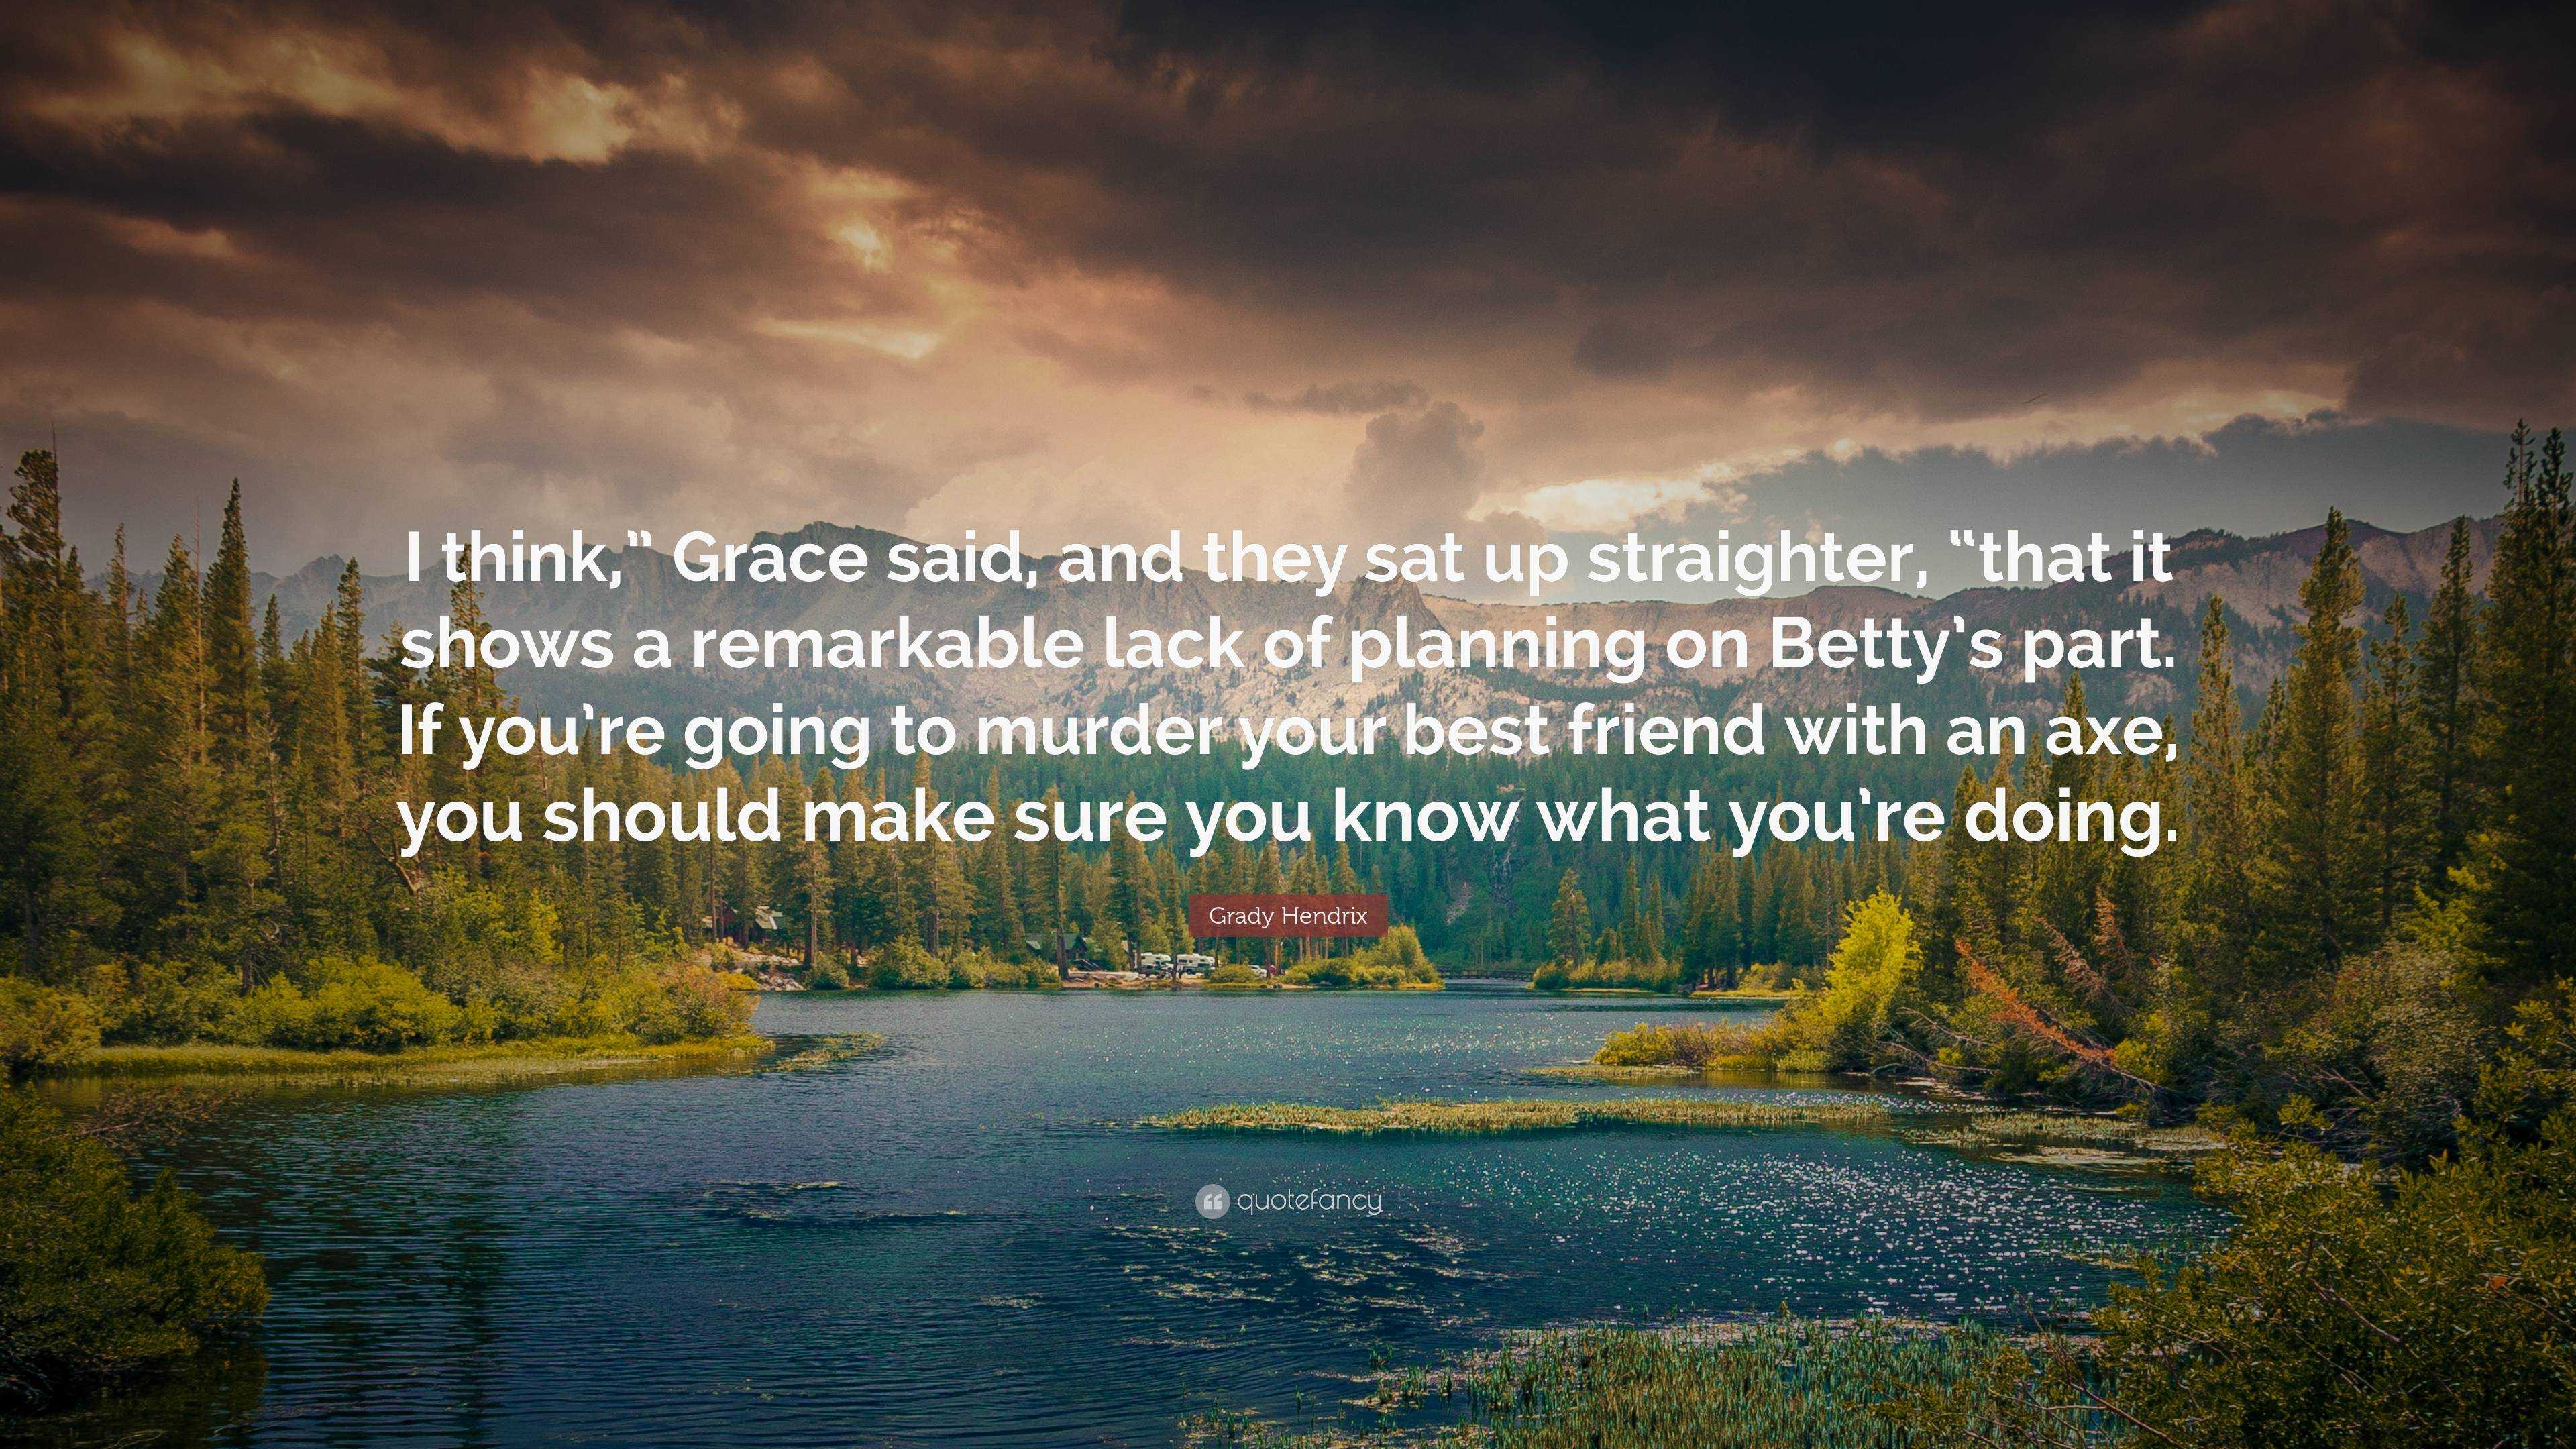 Grady Hendrix Quote: “I think,” Grace said, and they sat up straighter ...